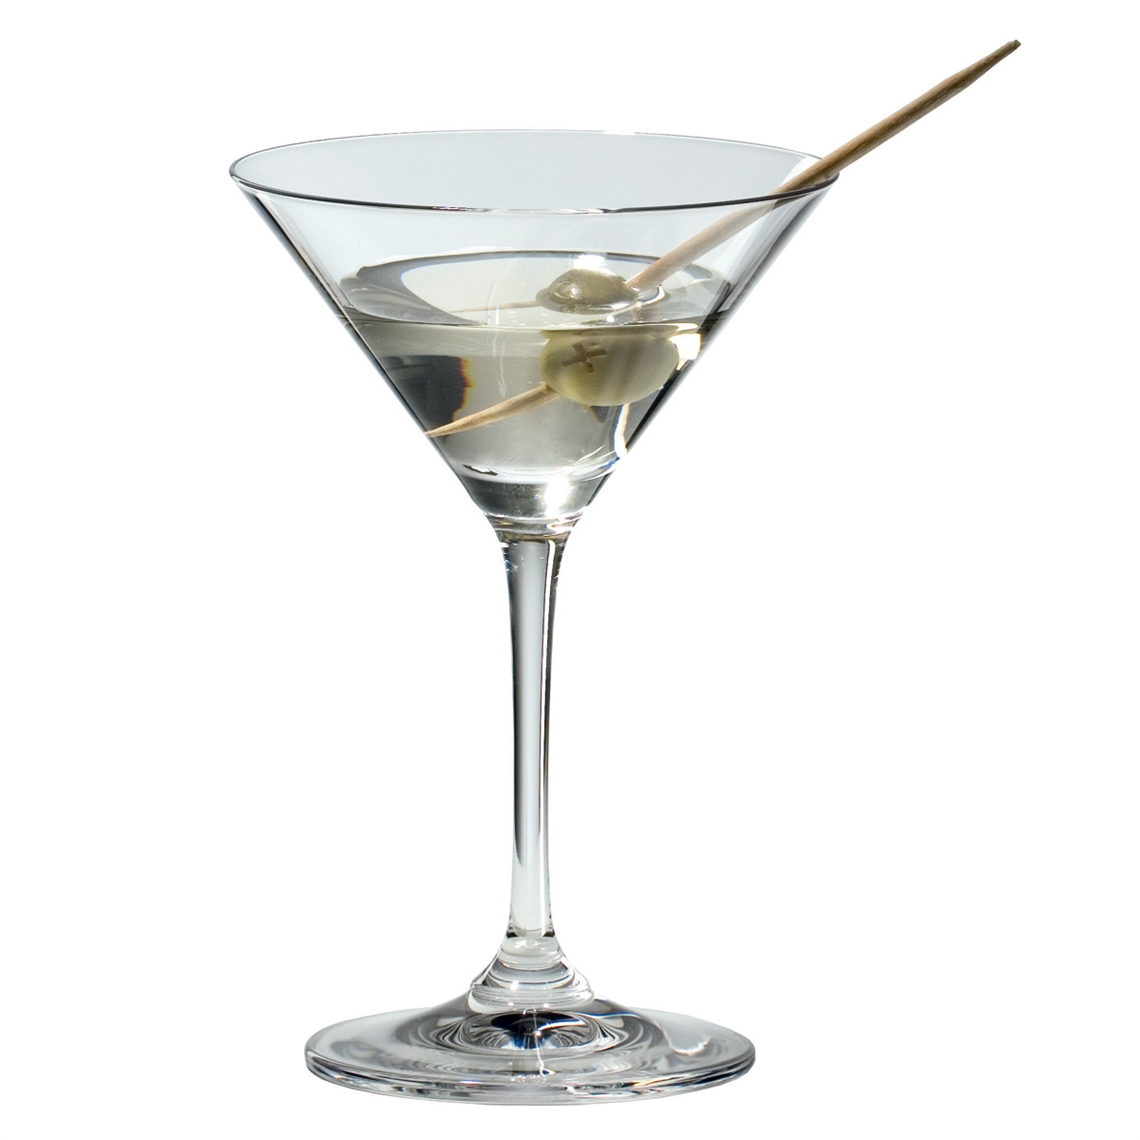 View more glass and co from our Martini Glasses range